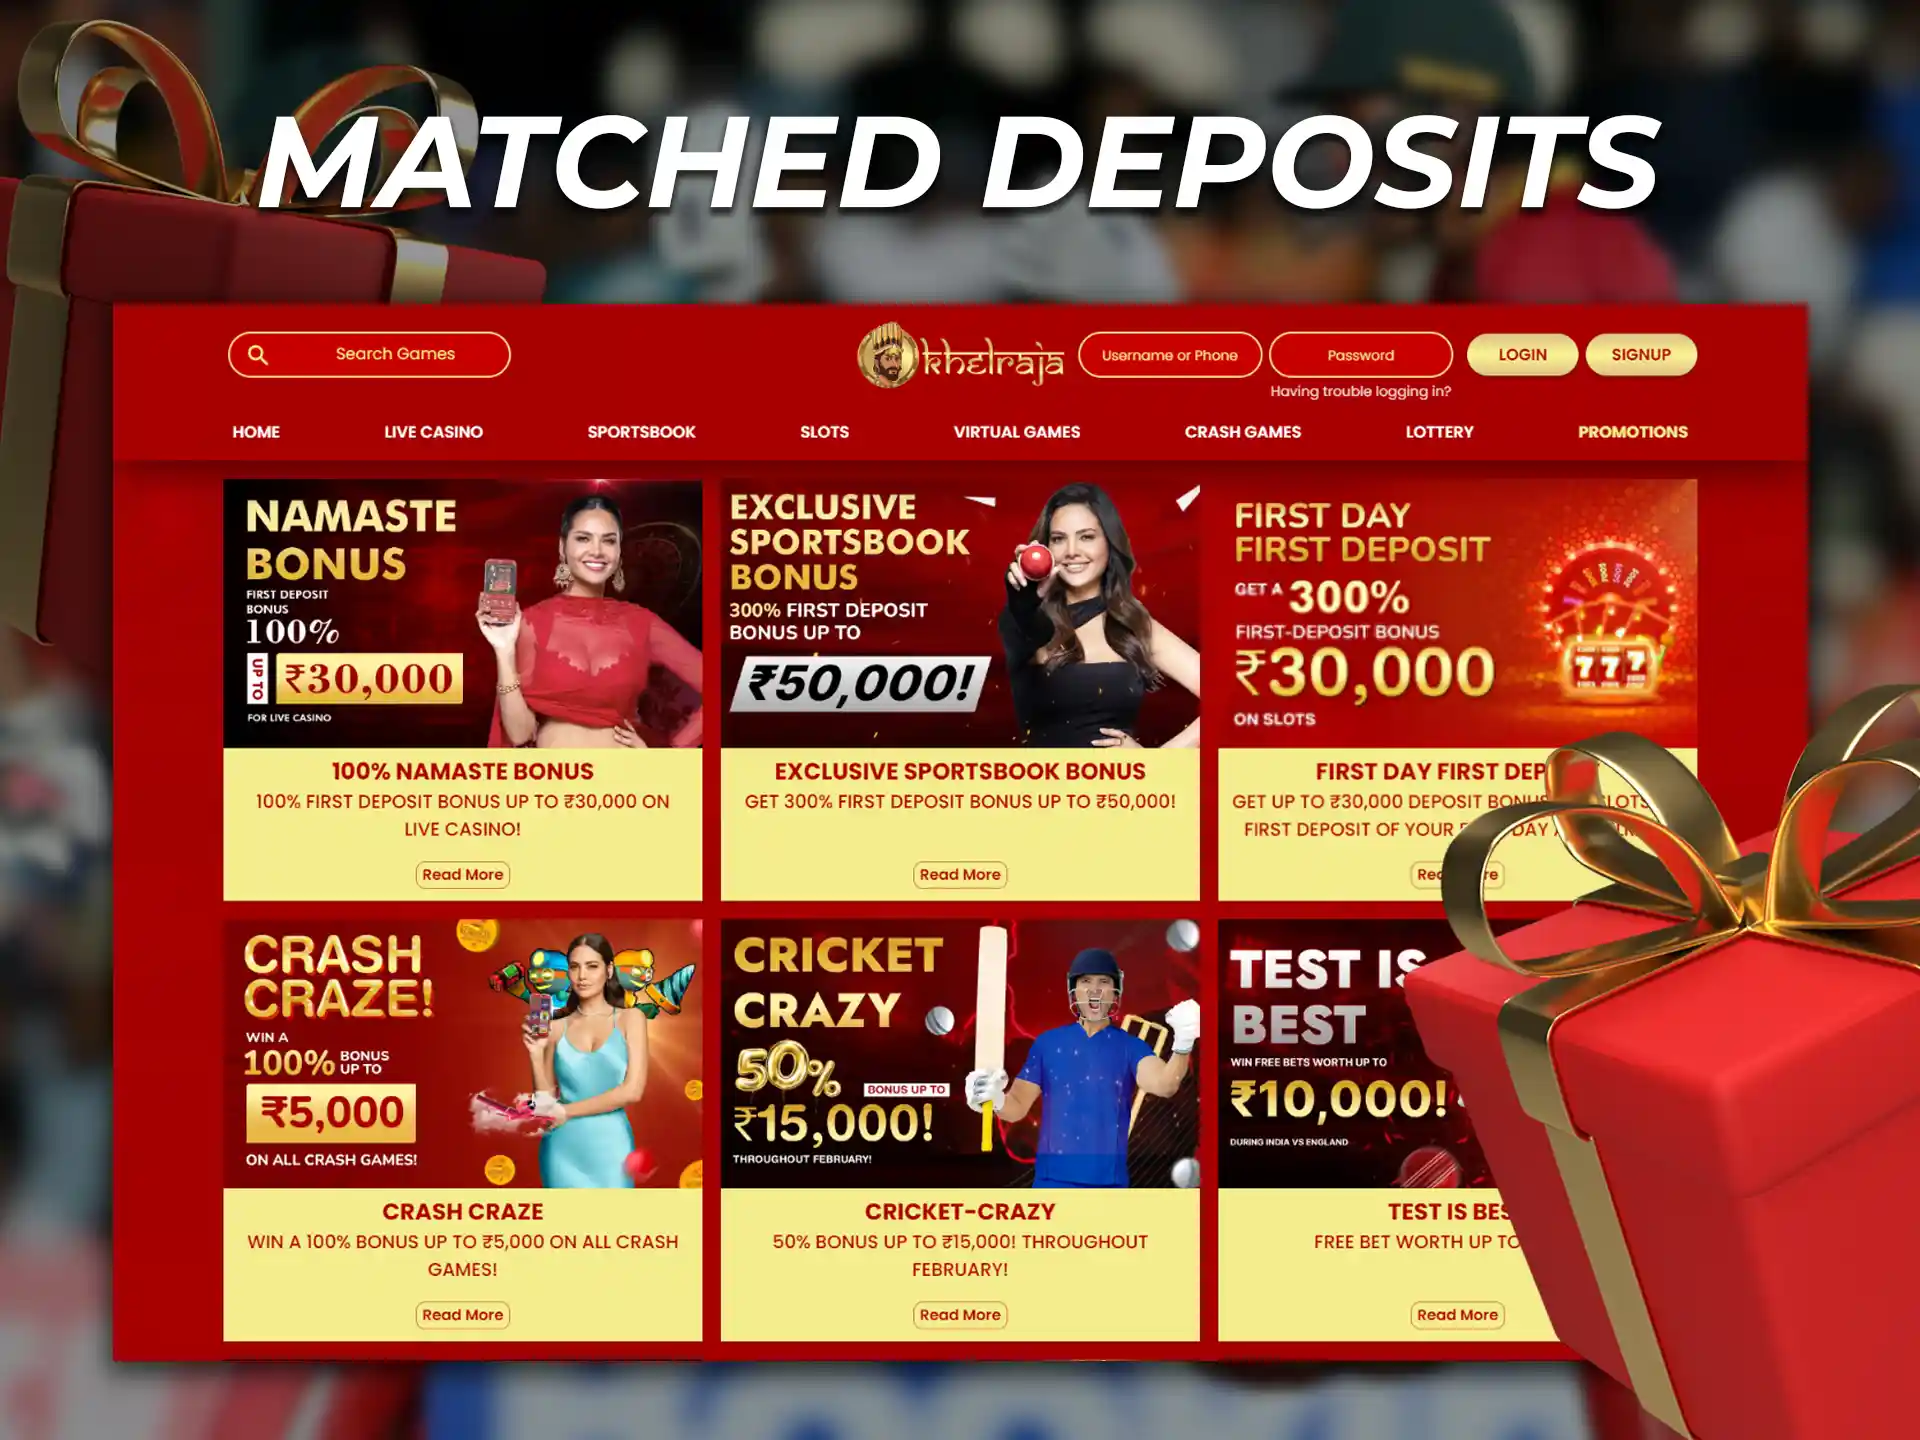 The bookmaker will compensate your deposit with bonus money.